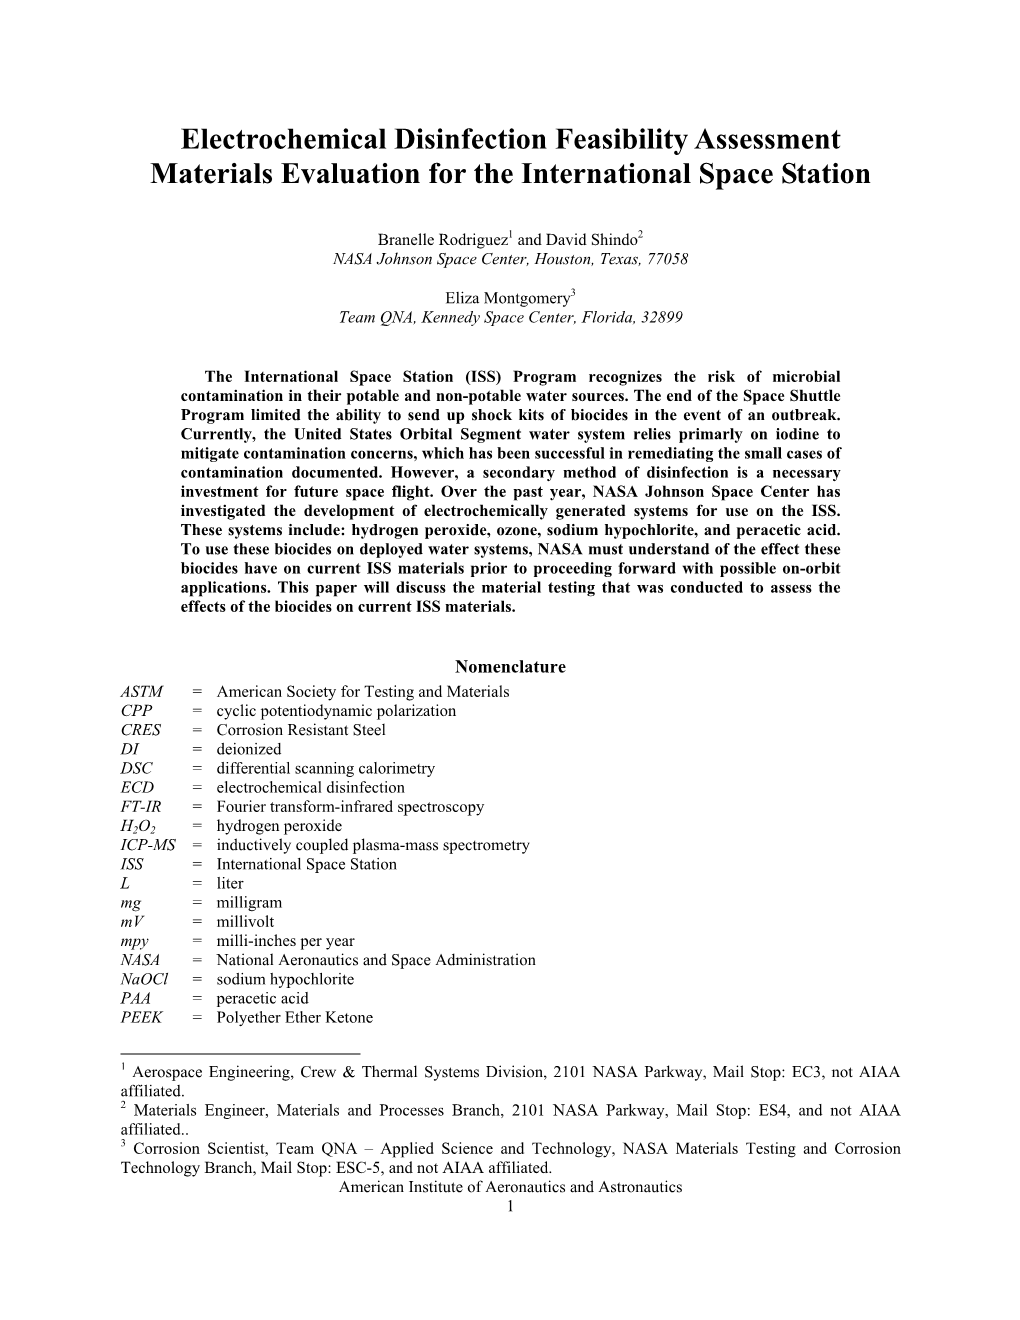 Electrochemical Disinfection Feasibility Assessment Materials Evaluation for the International Space Station